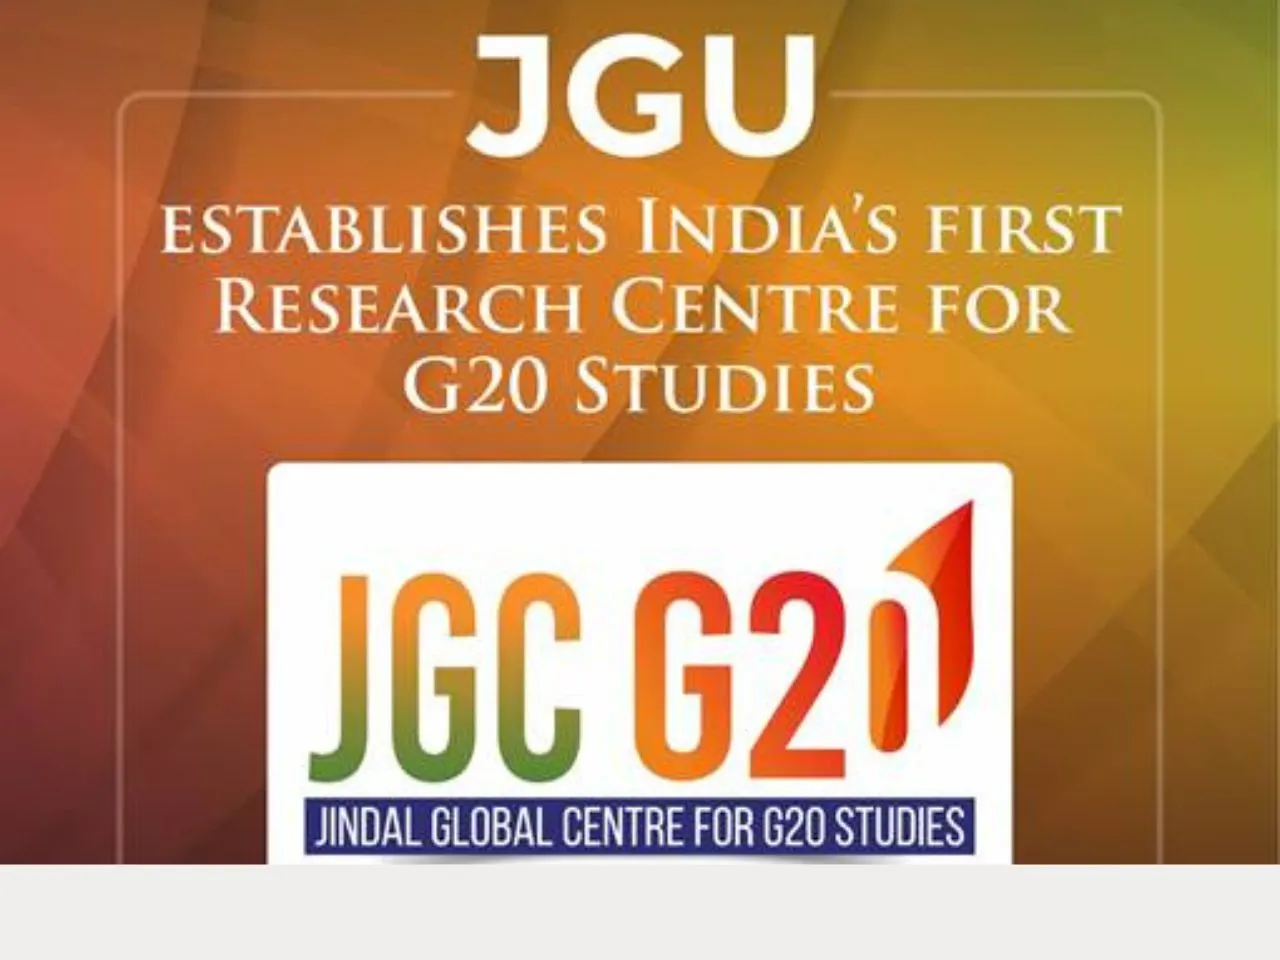 O.P. Jindal Establishes "India’s First" Research Centre on G20 Studies